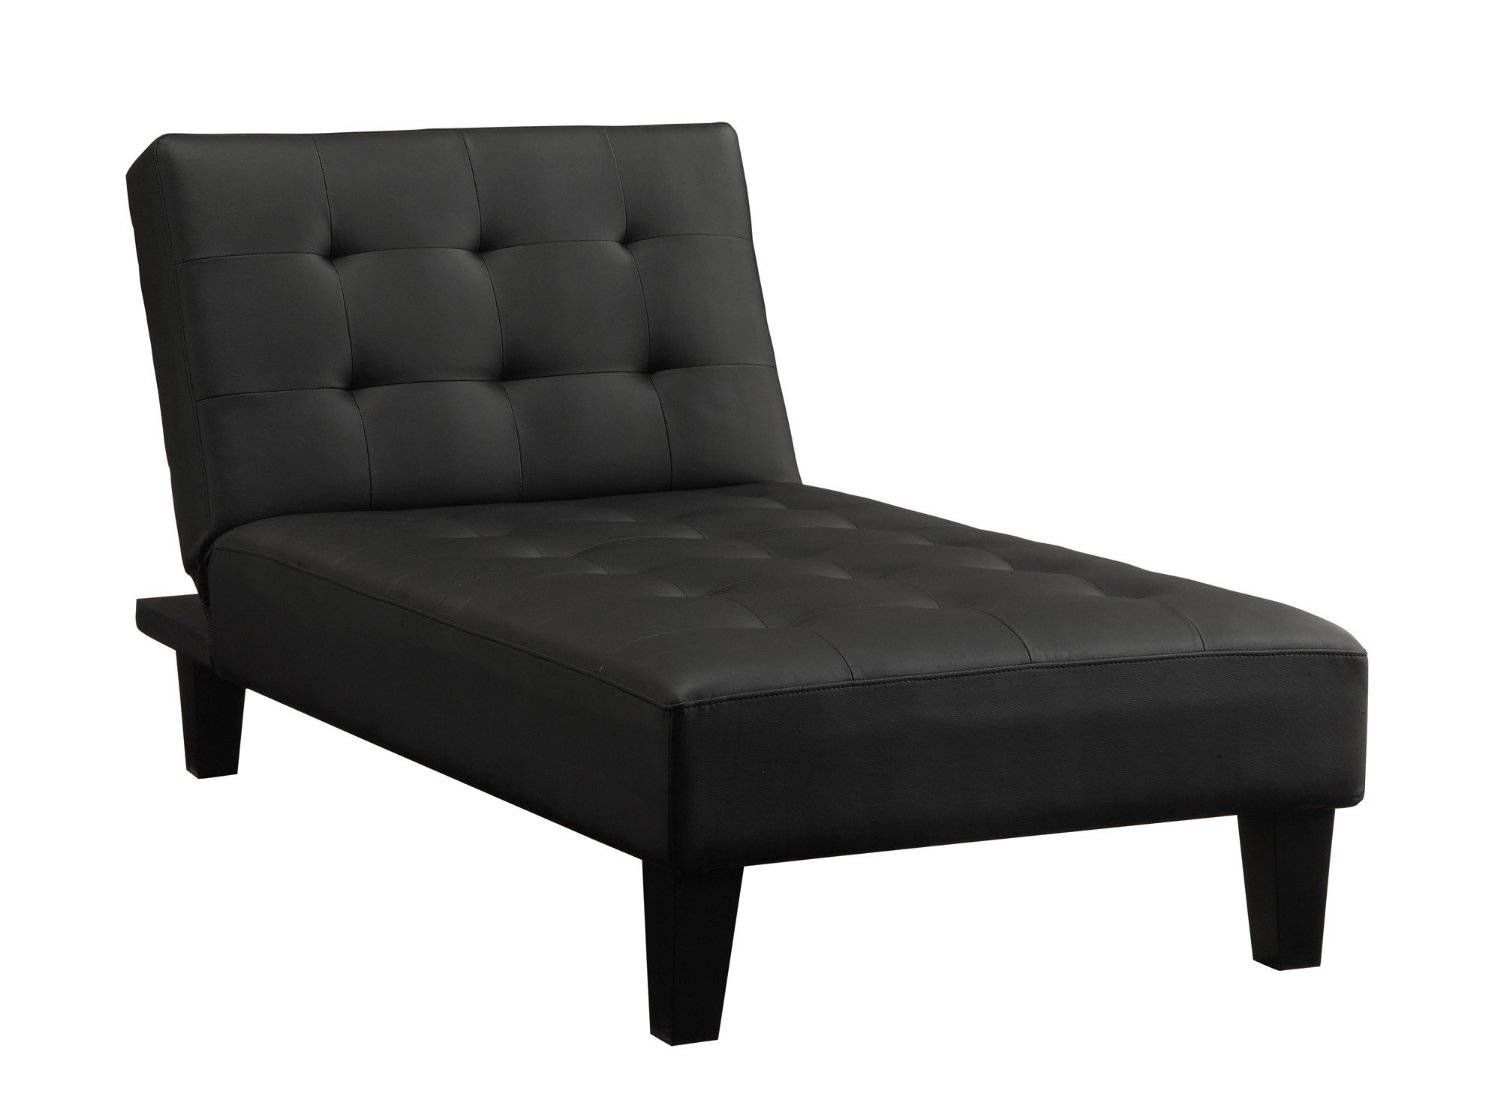 Popular Lounge Chaise Sofa And Chaise Lounge Chairs 11 Image 7 Of For Sofa Lounge Chairs (View 27 of 30)